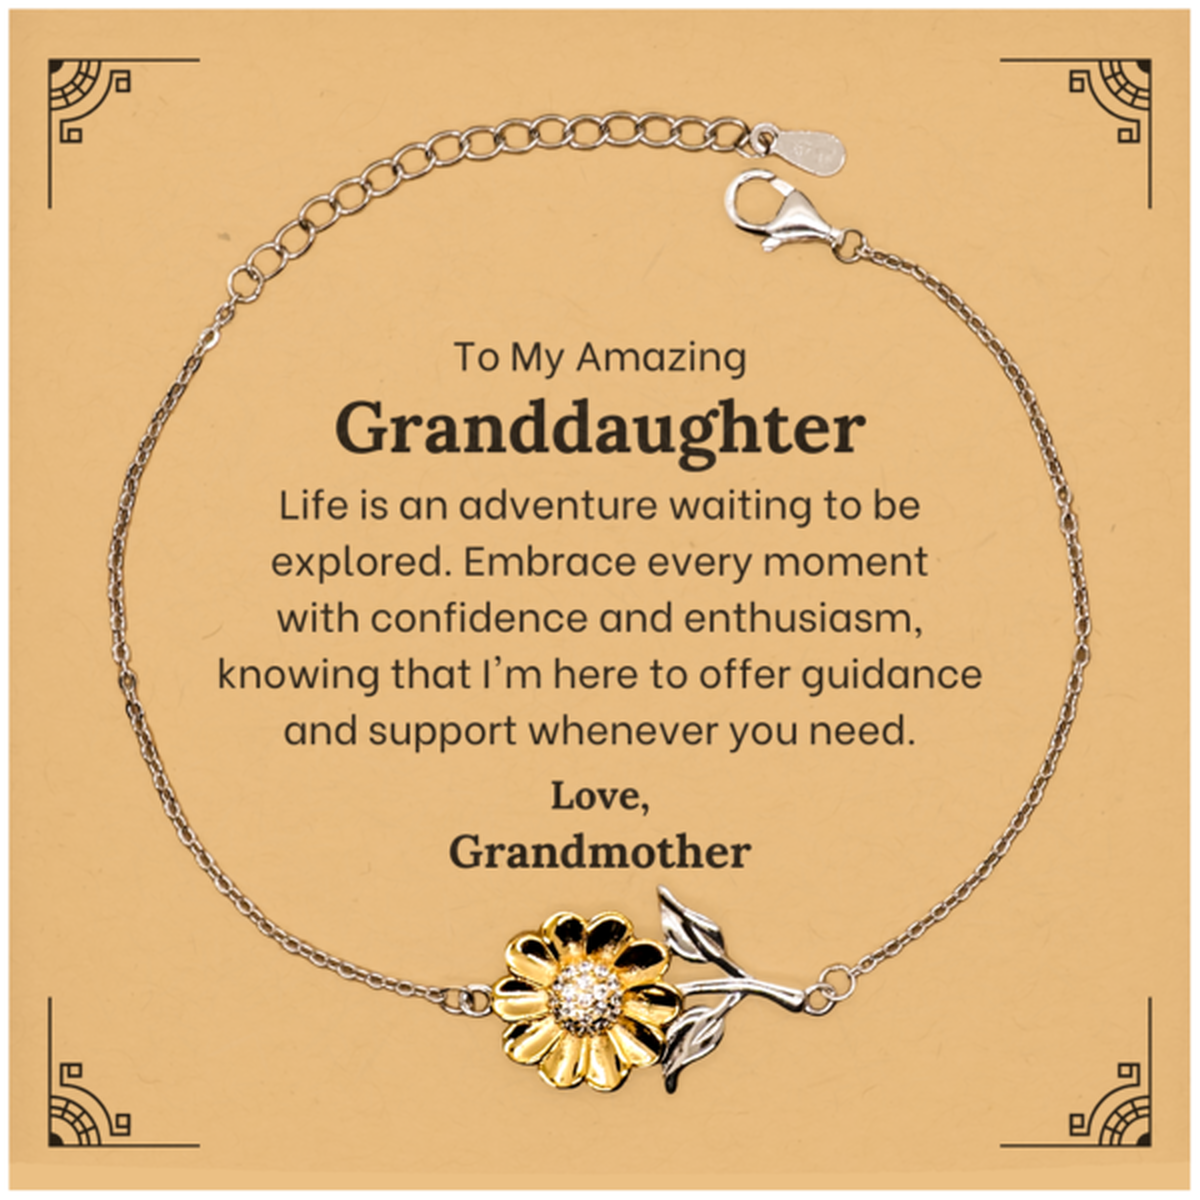 To My Amazing Granddaughter Supporting Sunflower Bracelet, Life is an adventure waiting to be explored, Birthday Unique Gifts for Granddaughter from Grandmother.